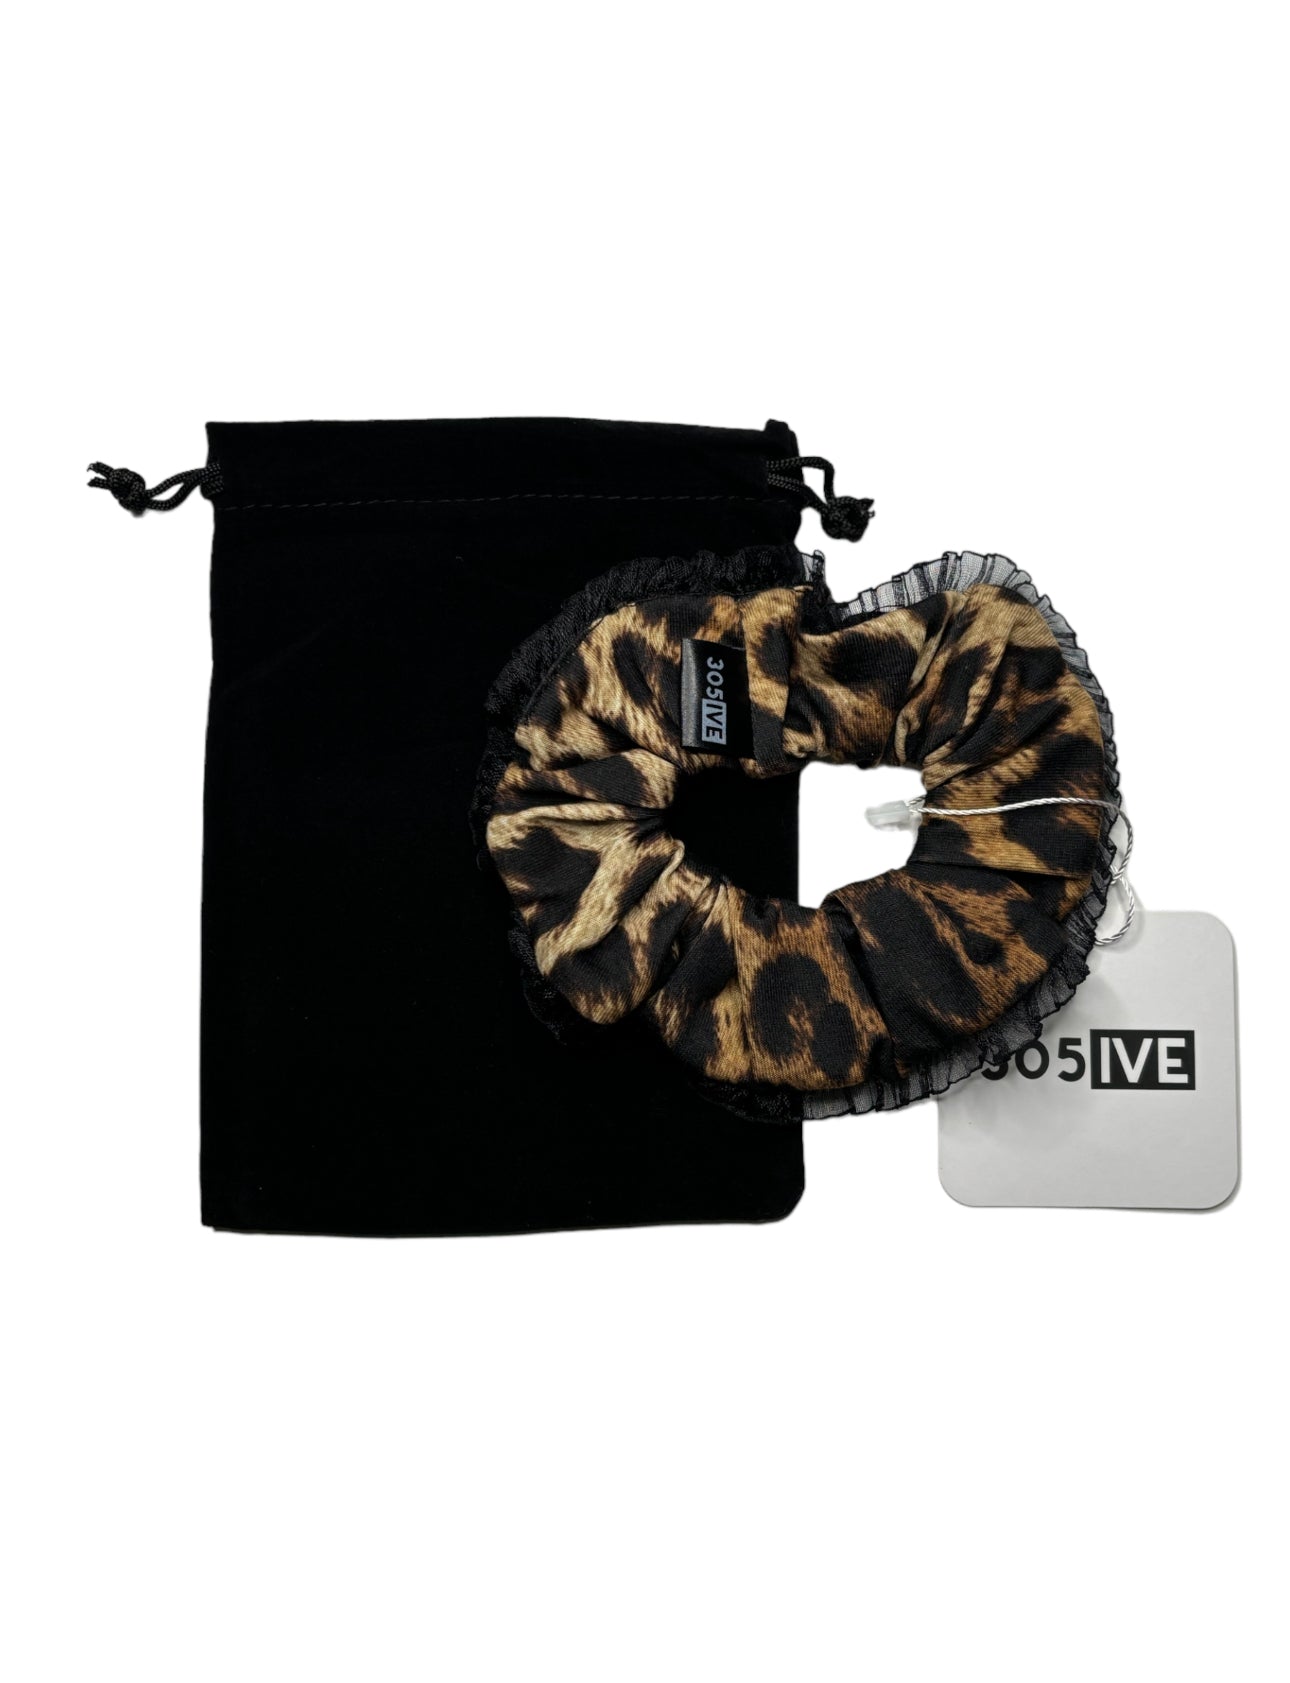 Lucille: the animal print scrunchie.